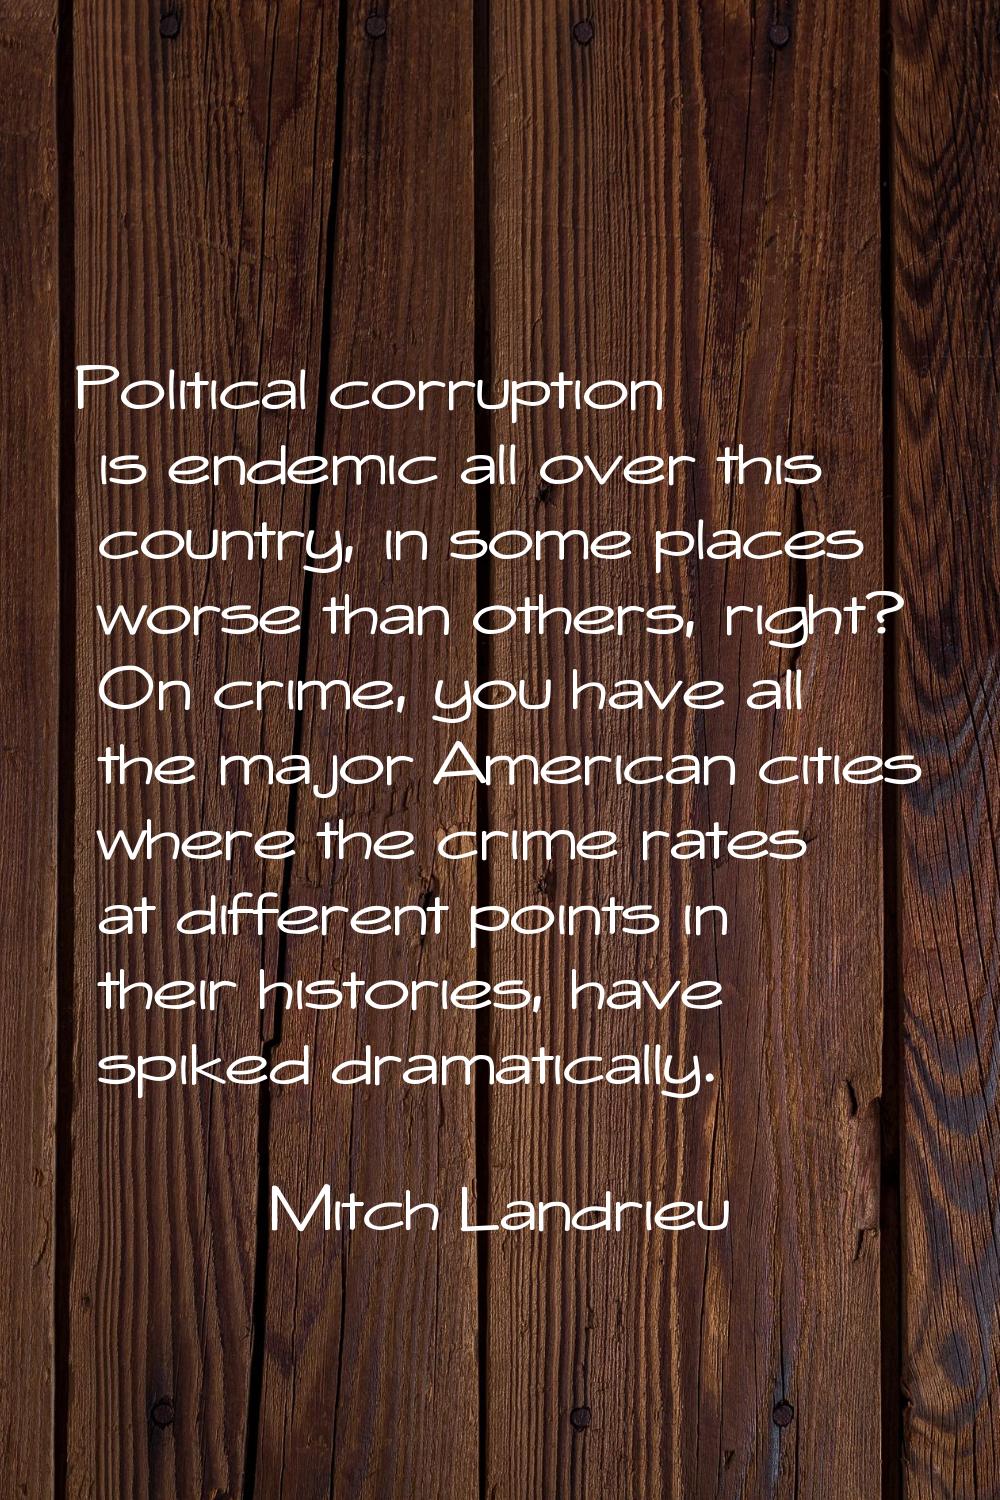 Political corruption is endemic all over this country, in some places worse than others, right? On 